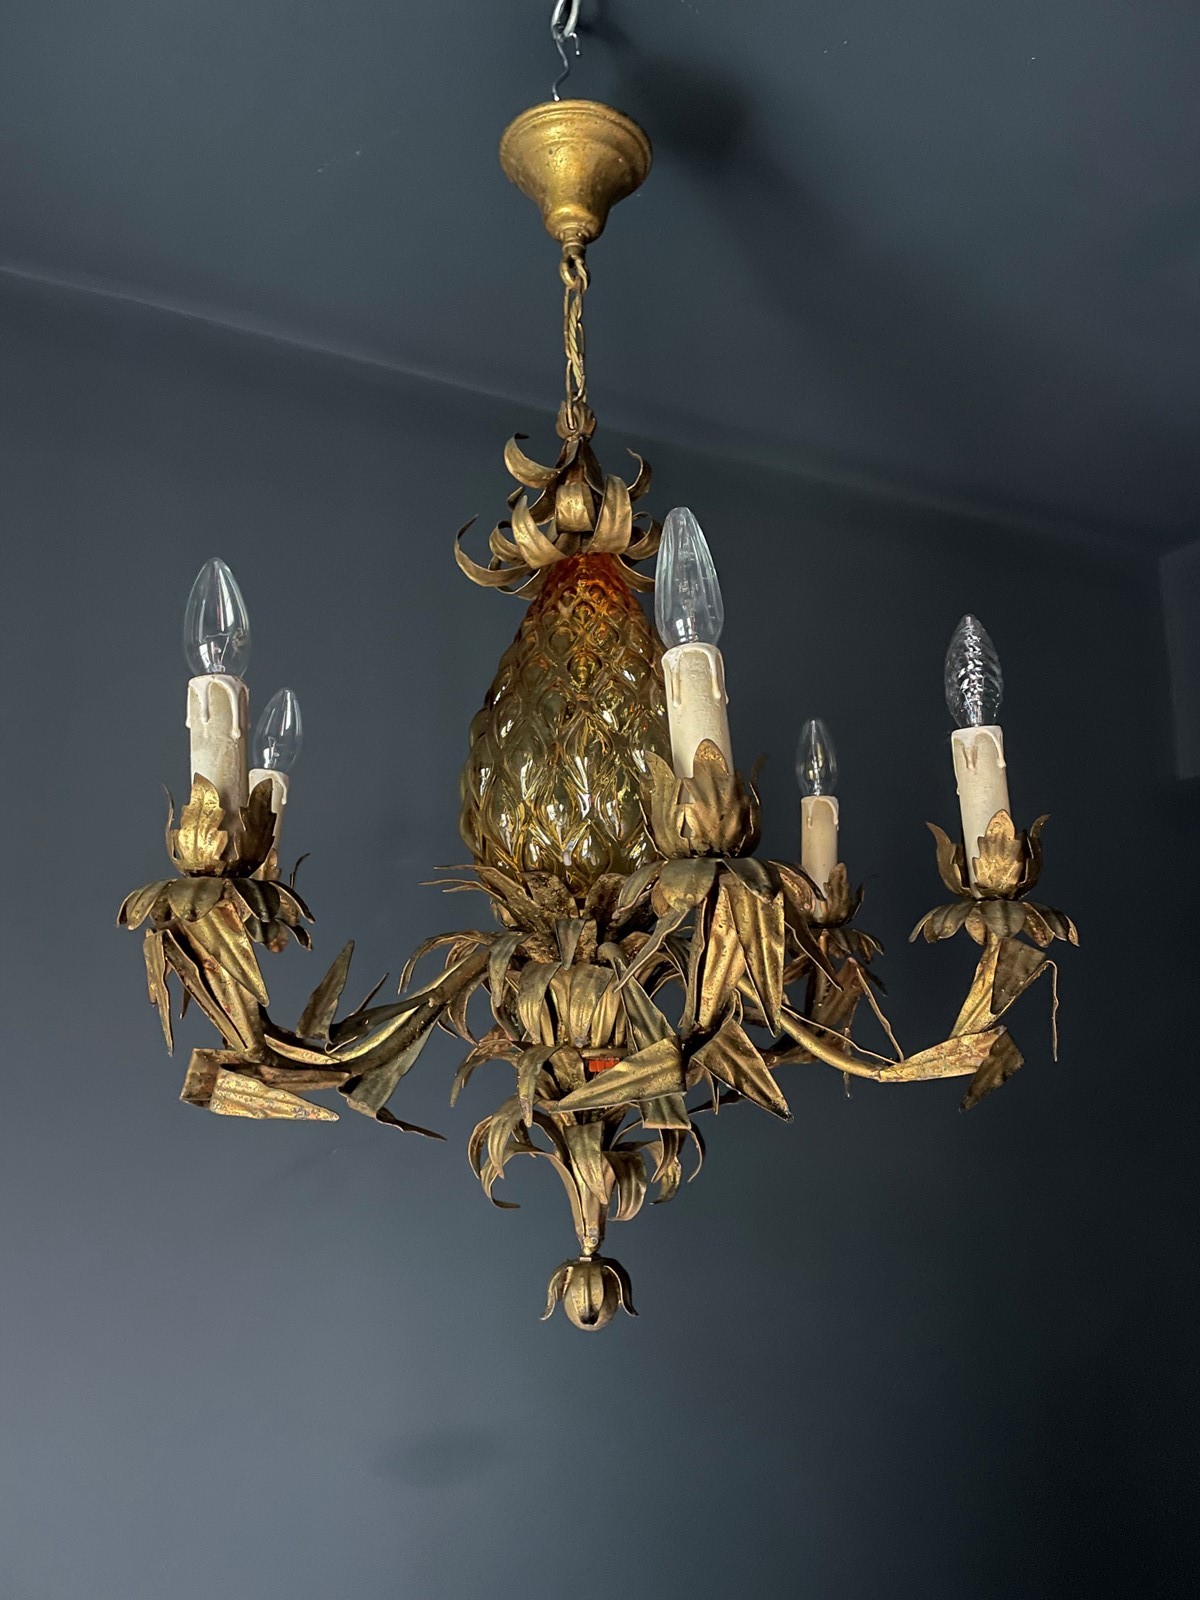 Large Midcentury Pineapple Chandelier - Decorative Collective